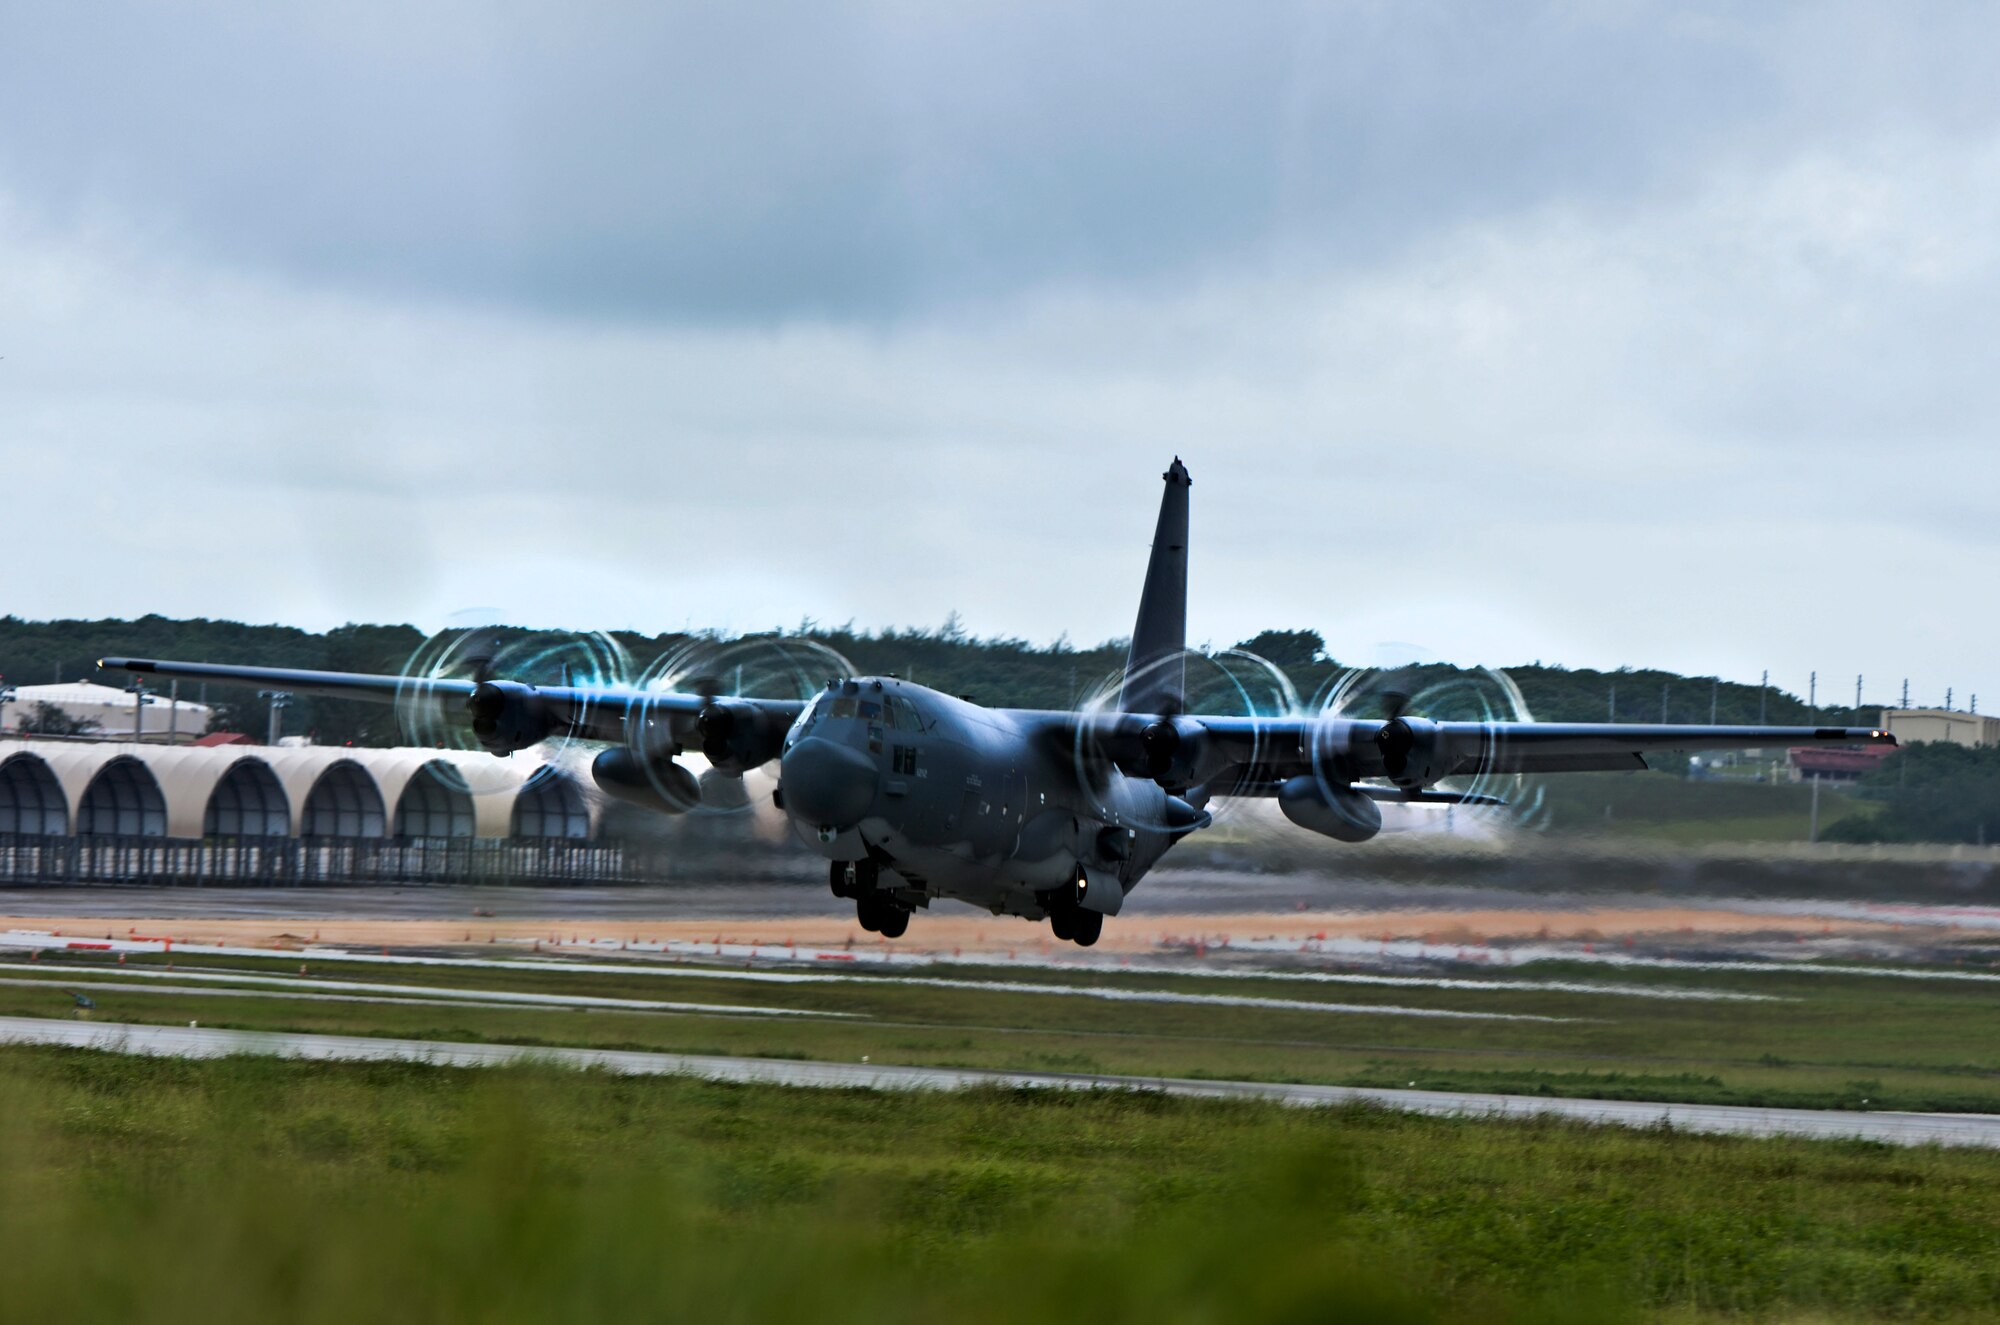 A C-130 Hercules takes off from Andersen Air Force Base, Guam for a static jump training mission, Aug. 21, 2013. The day of training, the jumpers receive standardized airborne training, starting with a briefing from the jumpmasters. (U.S. Air Force photo by Airman 1st Class Marianique Santos/Released)